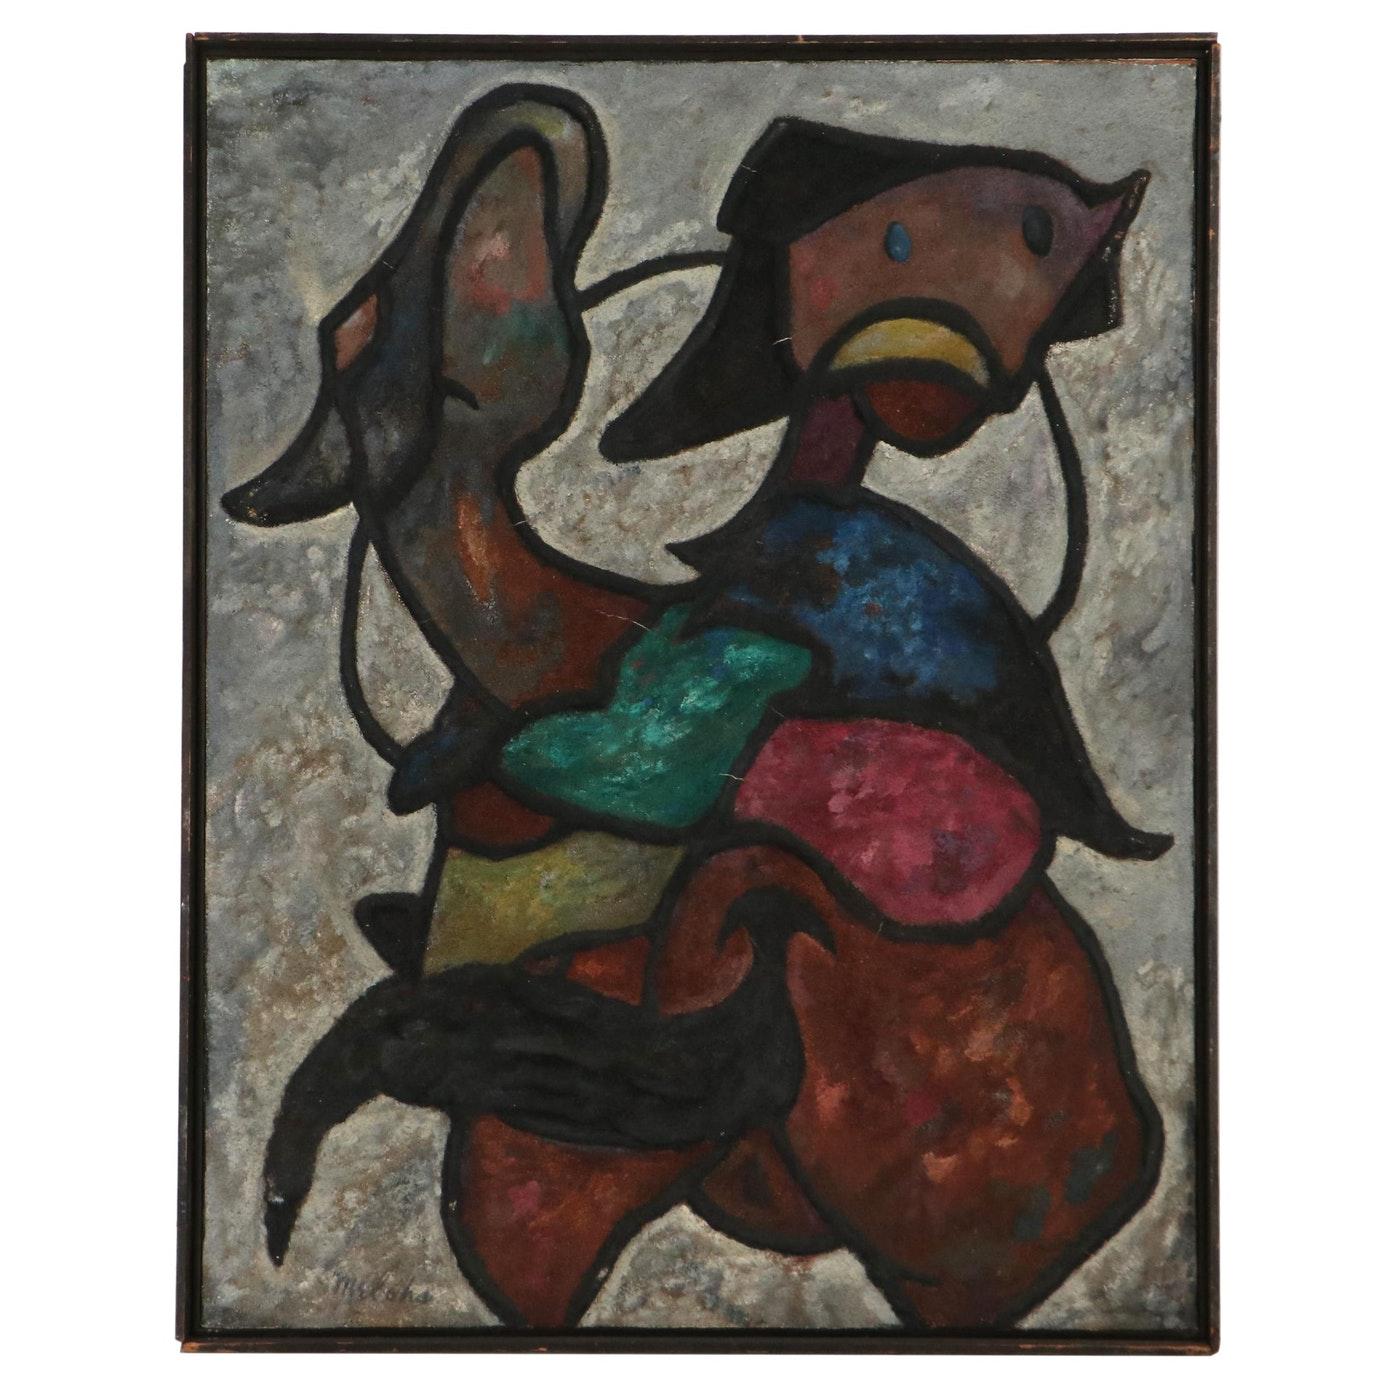 Charles Melohs (American, 1908 – 1982)
Desert Rider, circa 1956
Mixed media composition on canvas
Signed to the lower left
Inscribed to the verso


Introducing the captivating Mixed Media Composition 